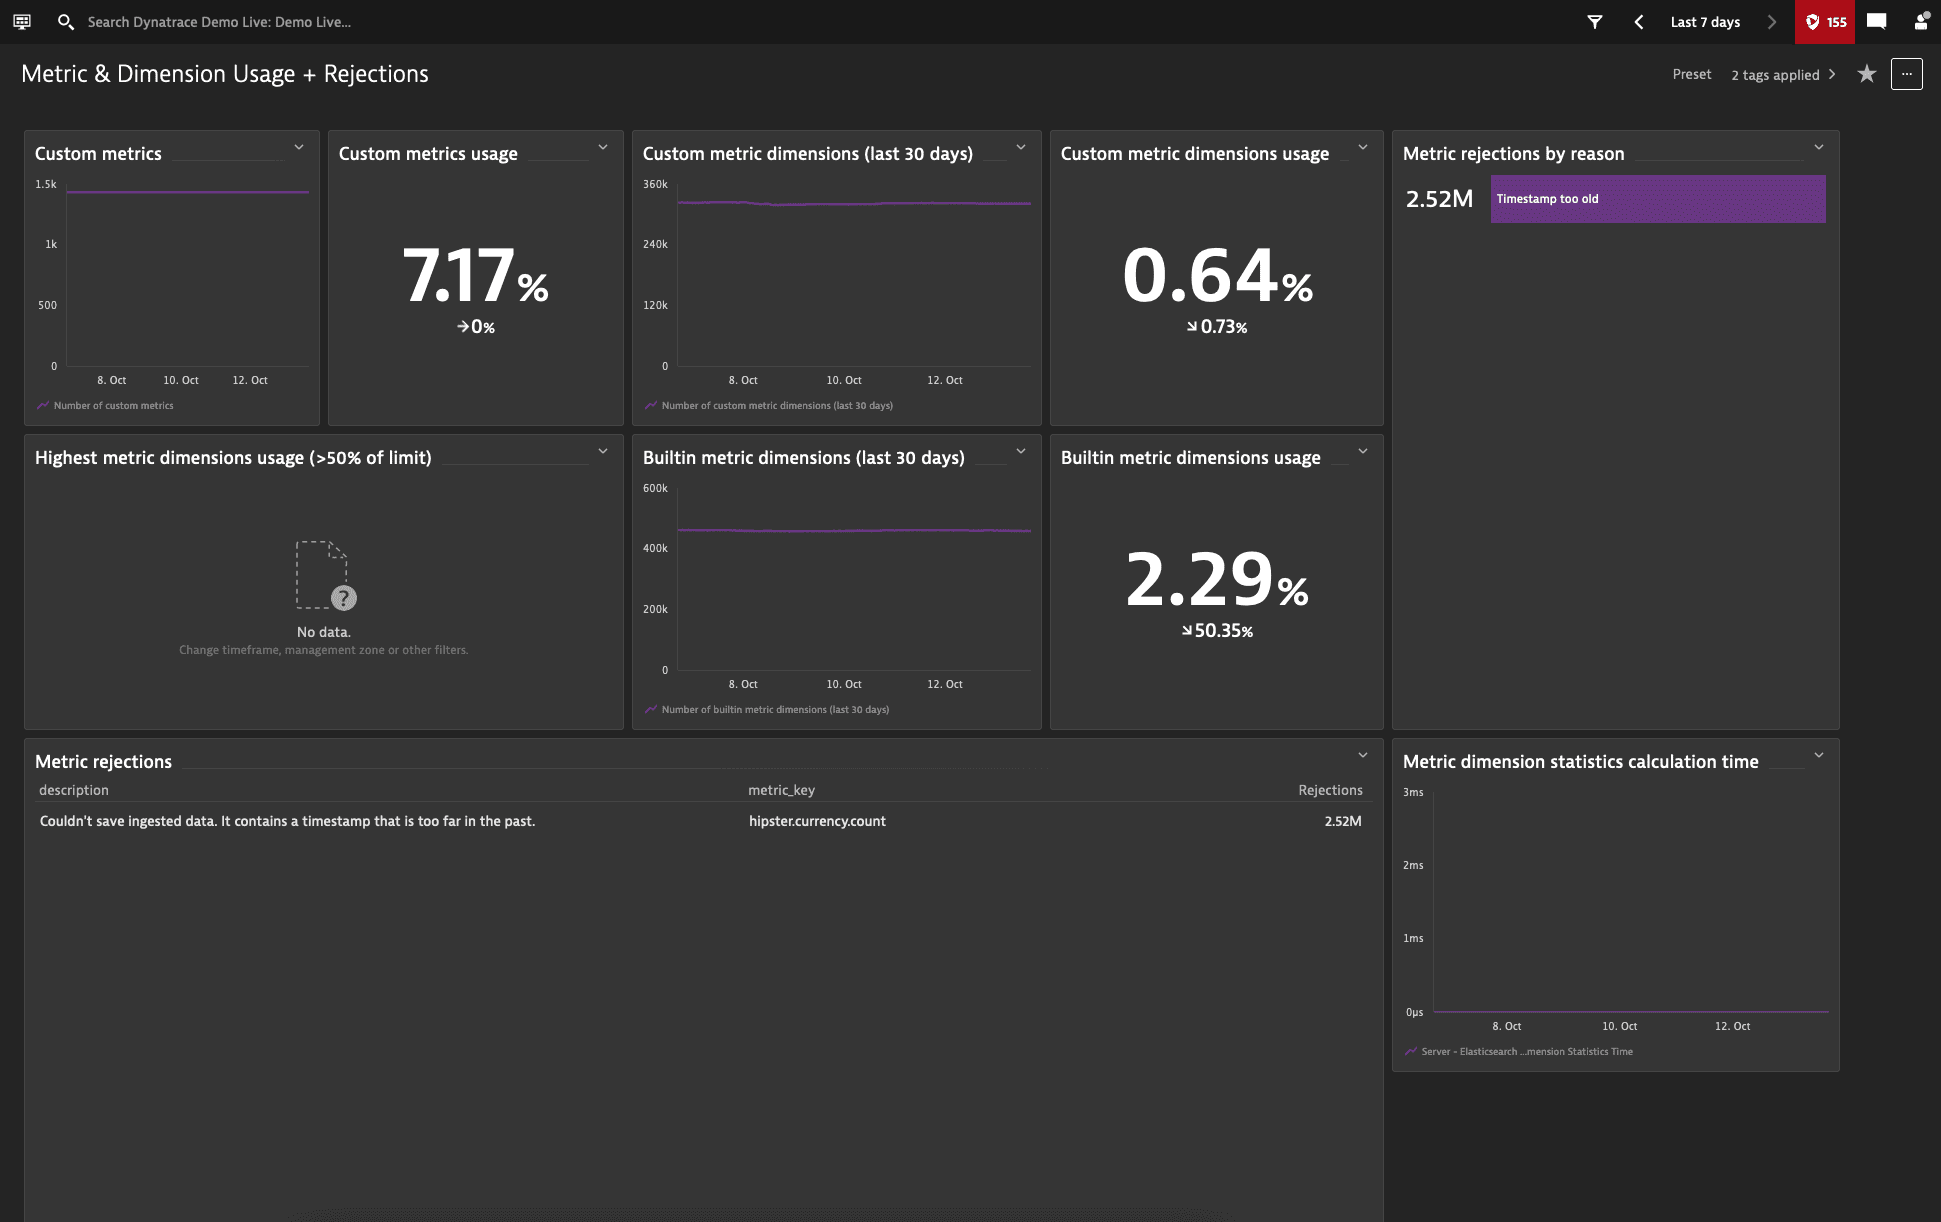 Metric & Dimension Usage + Rejections dashboard